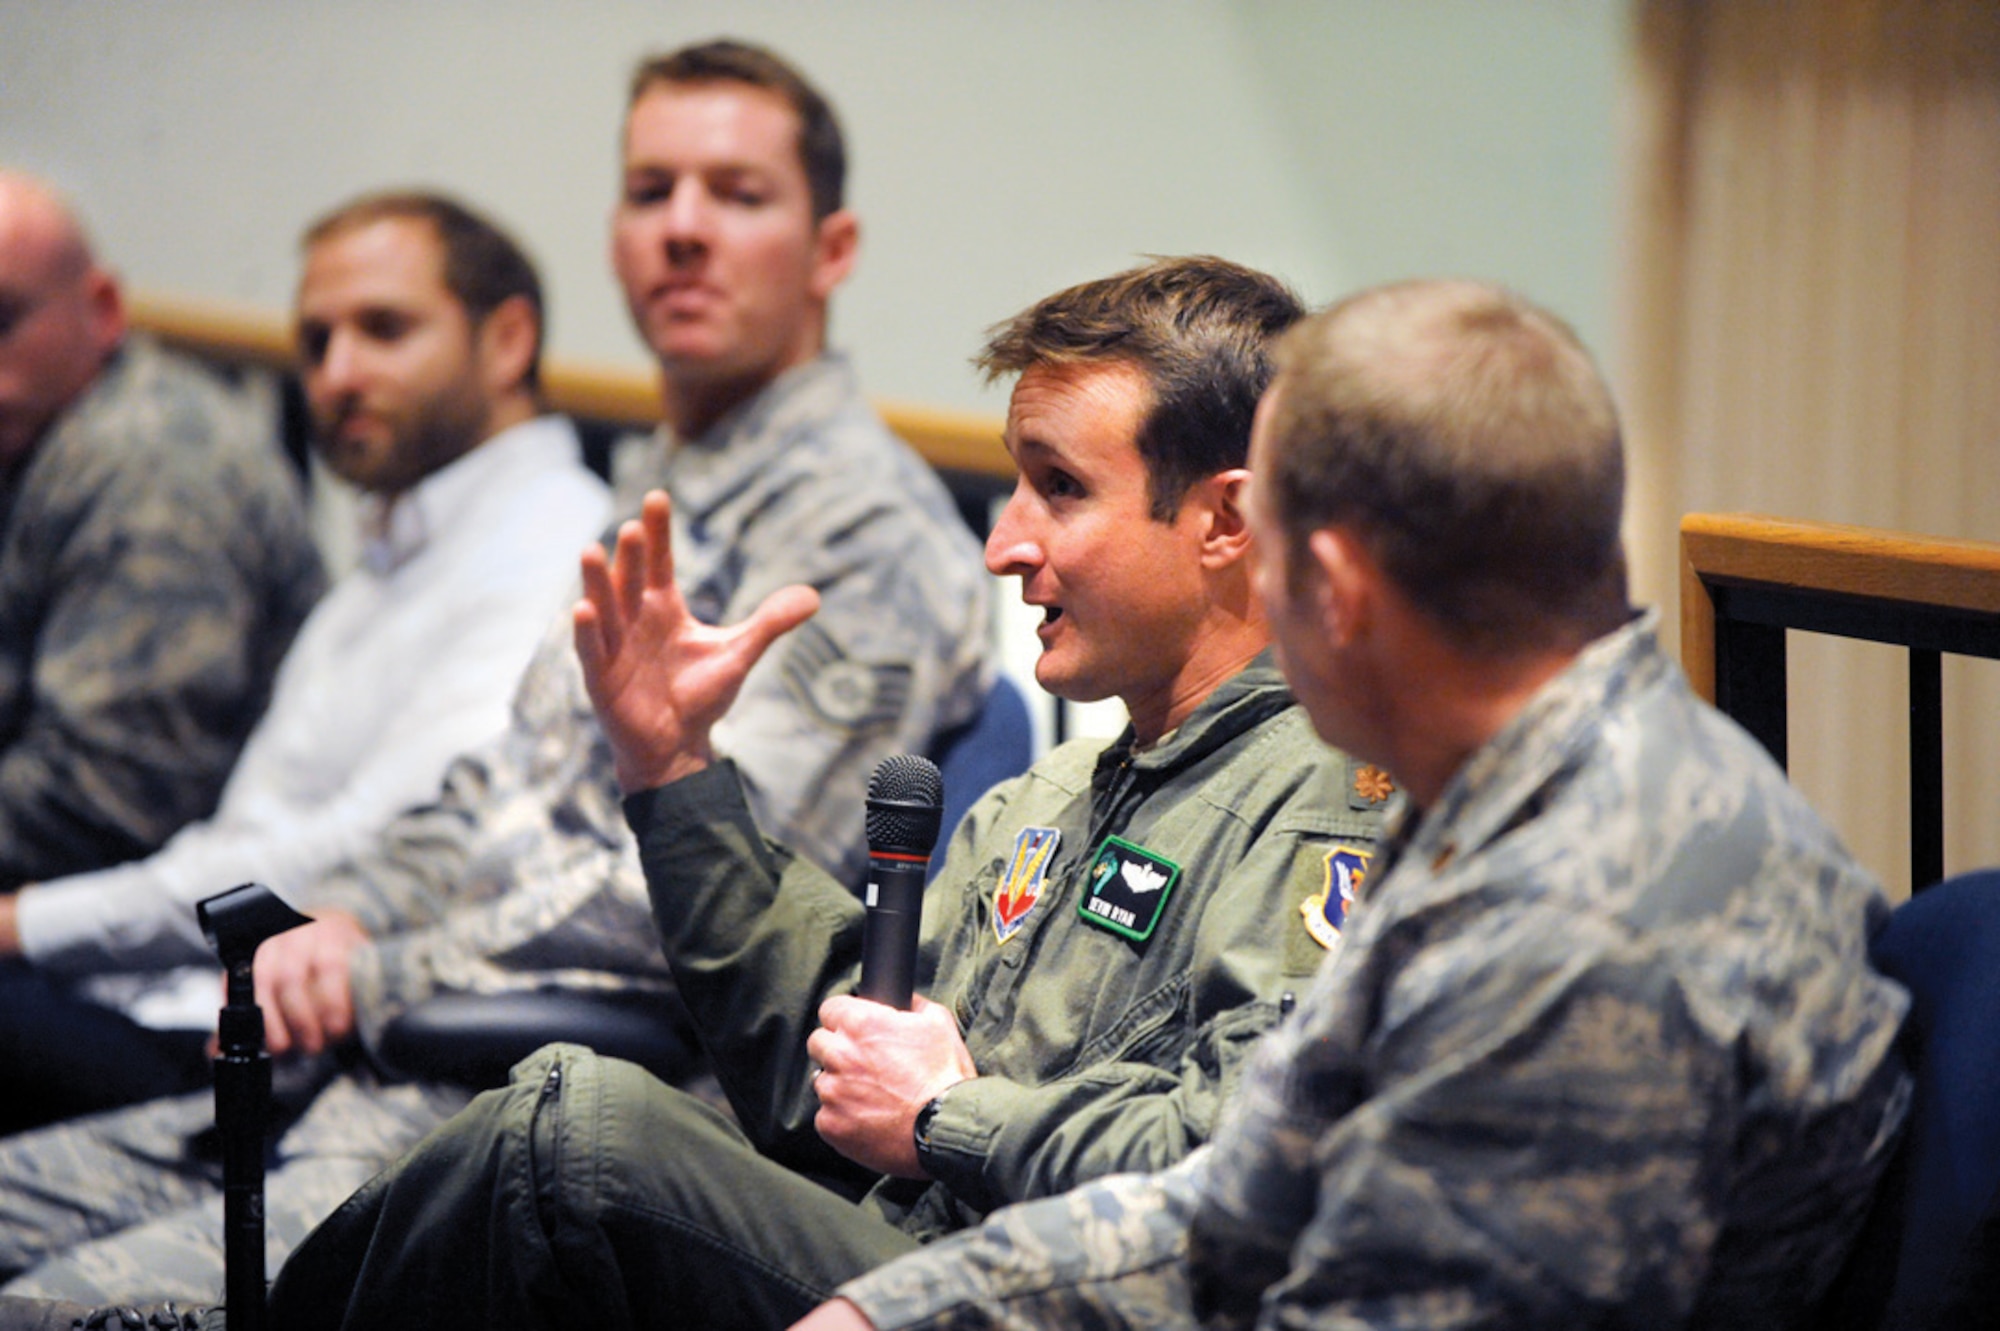 Maj. Devin Ryan discusses his role in combat rescue operations as shown in the National Geographic Channel documentary "Inside Combat Rescue" at the Air Force Academy Feb. 1, 2013. Ryan is a 2001 Academy graduate and an HH-60 Pave Hawk pilot with the 66th Rescue Squadron at Nellis Air Force Base, Nev. The six-part TV series premieres Feb. 18. (U.S. Air Force photo/Carol Lawrence)